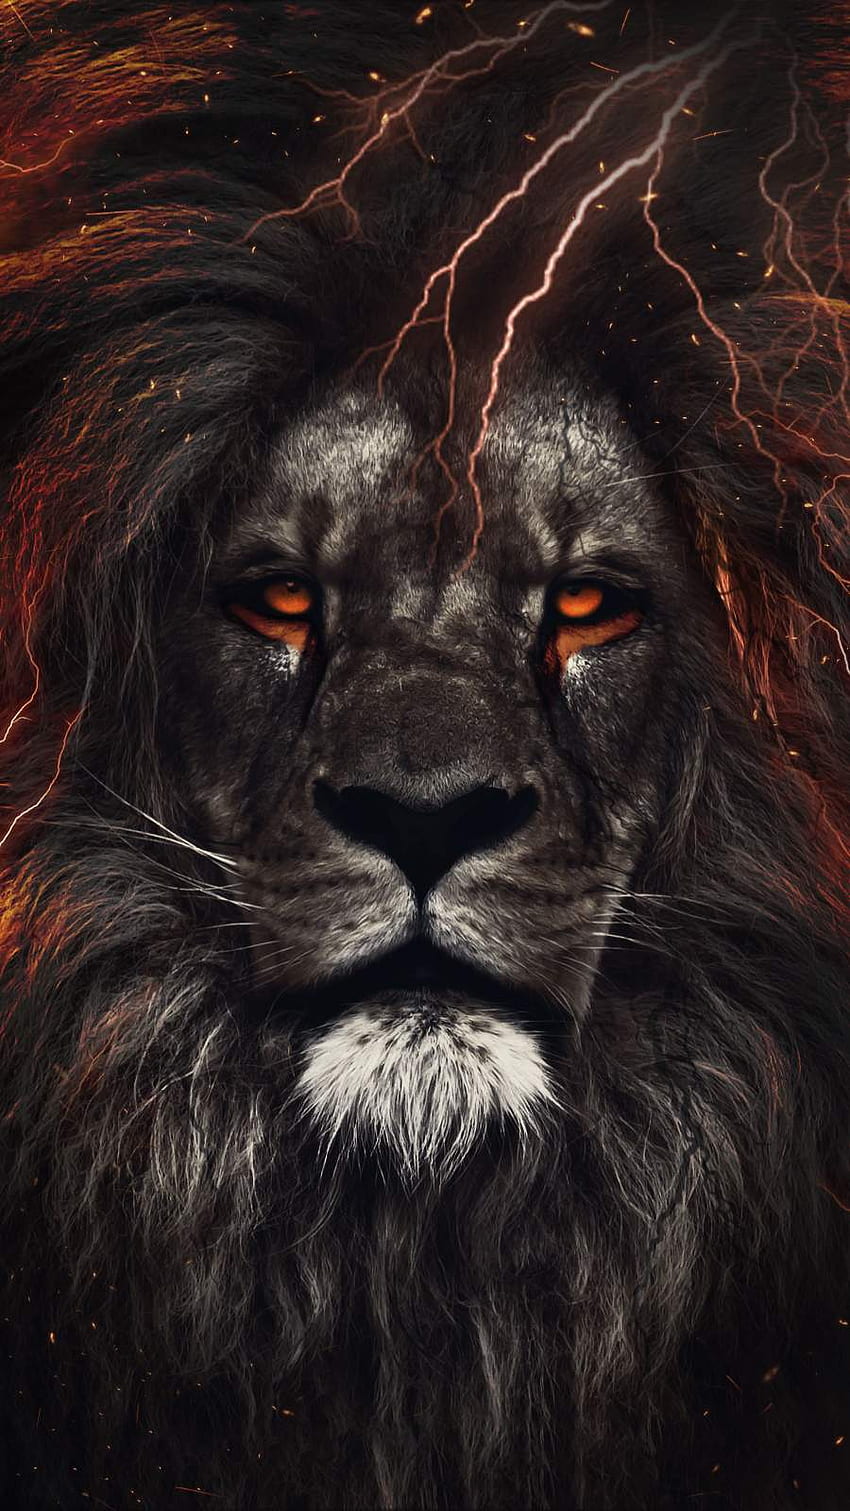 Angry lion 1080P, 2K, 4K, 5K HD wallpapers free download | Wallpaper Flare